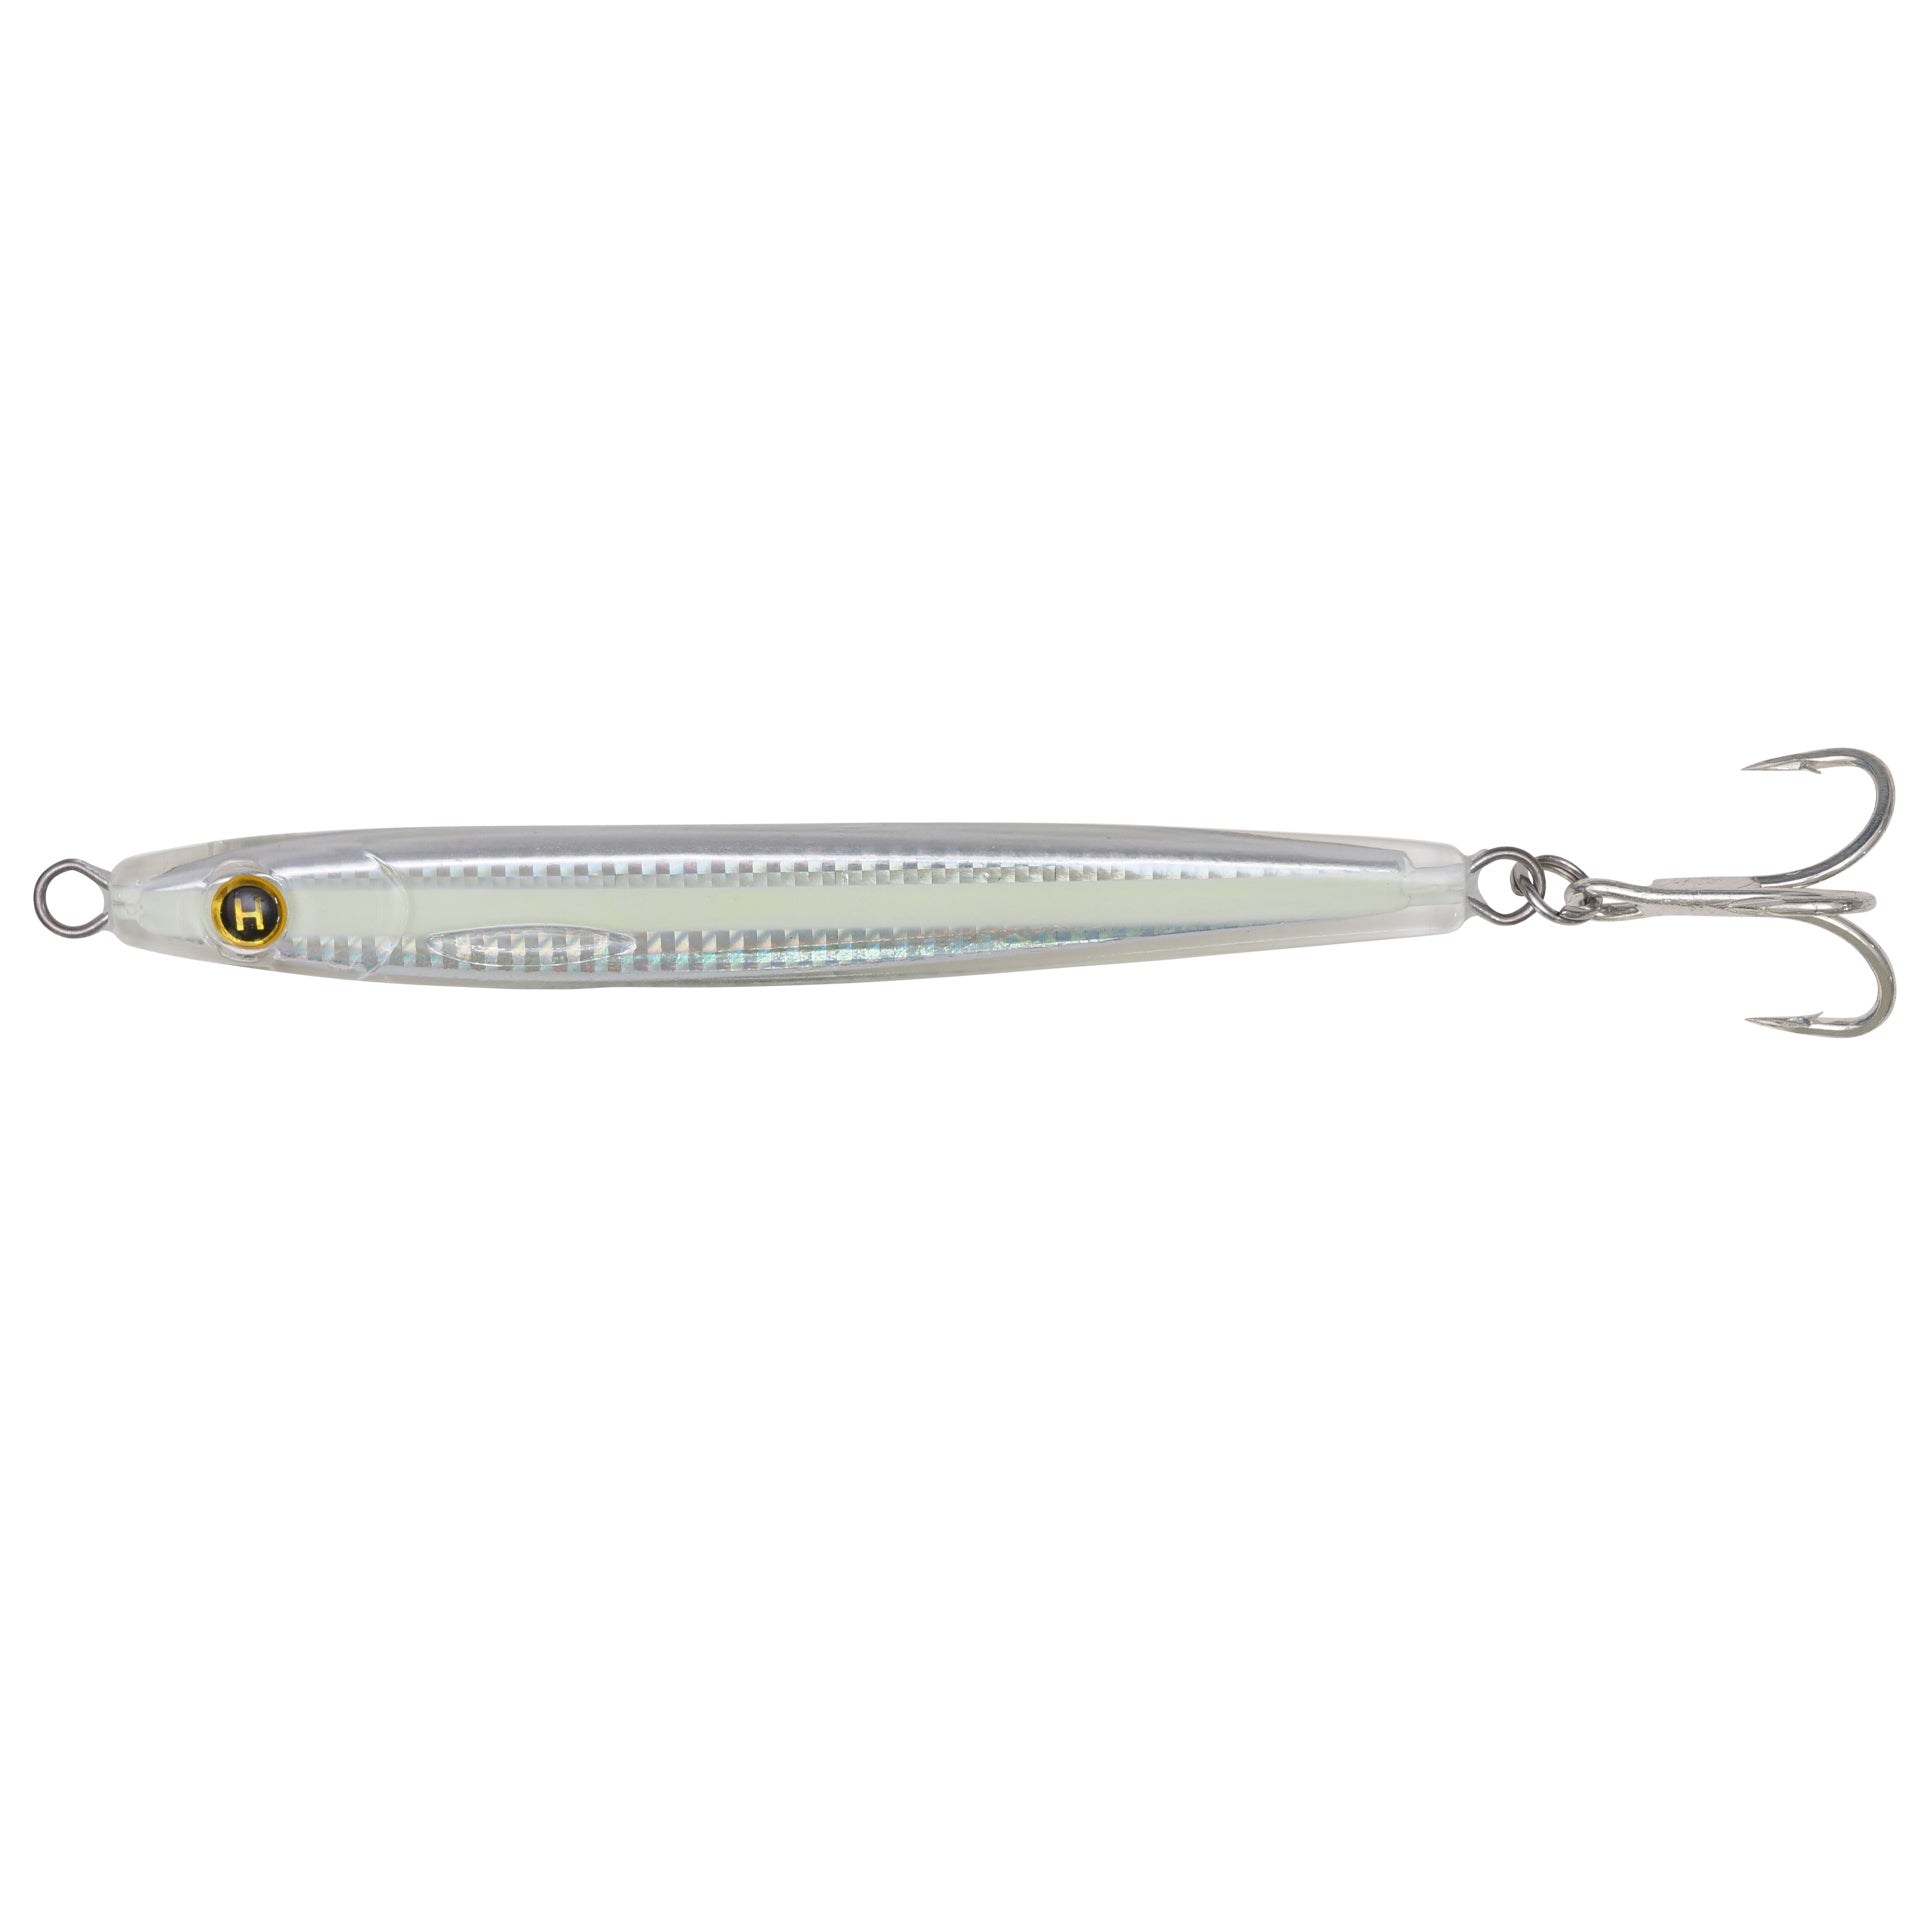 Epoxy Resin Fishing Jig Lure (2 inch / 0.5 Ounce) - Great for Striped Bass,  Tuna and Other Game Fish (Bunker, 0.5 Ounce)